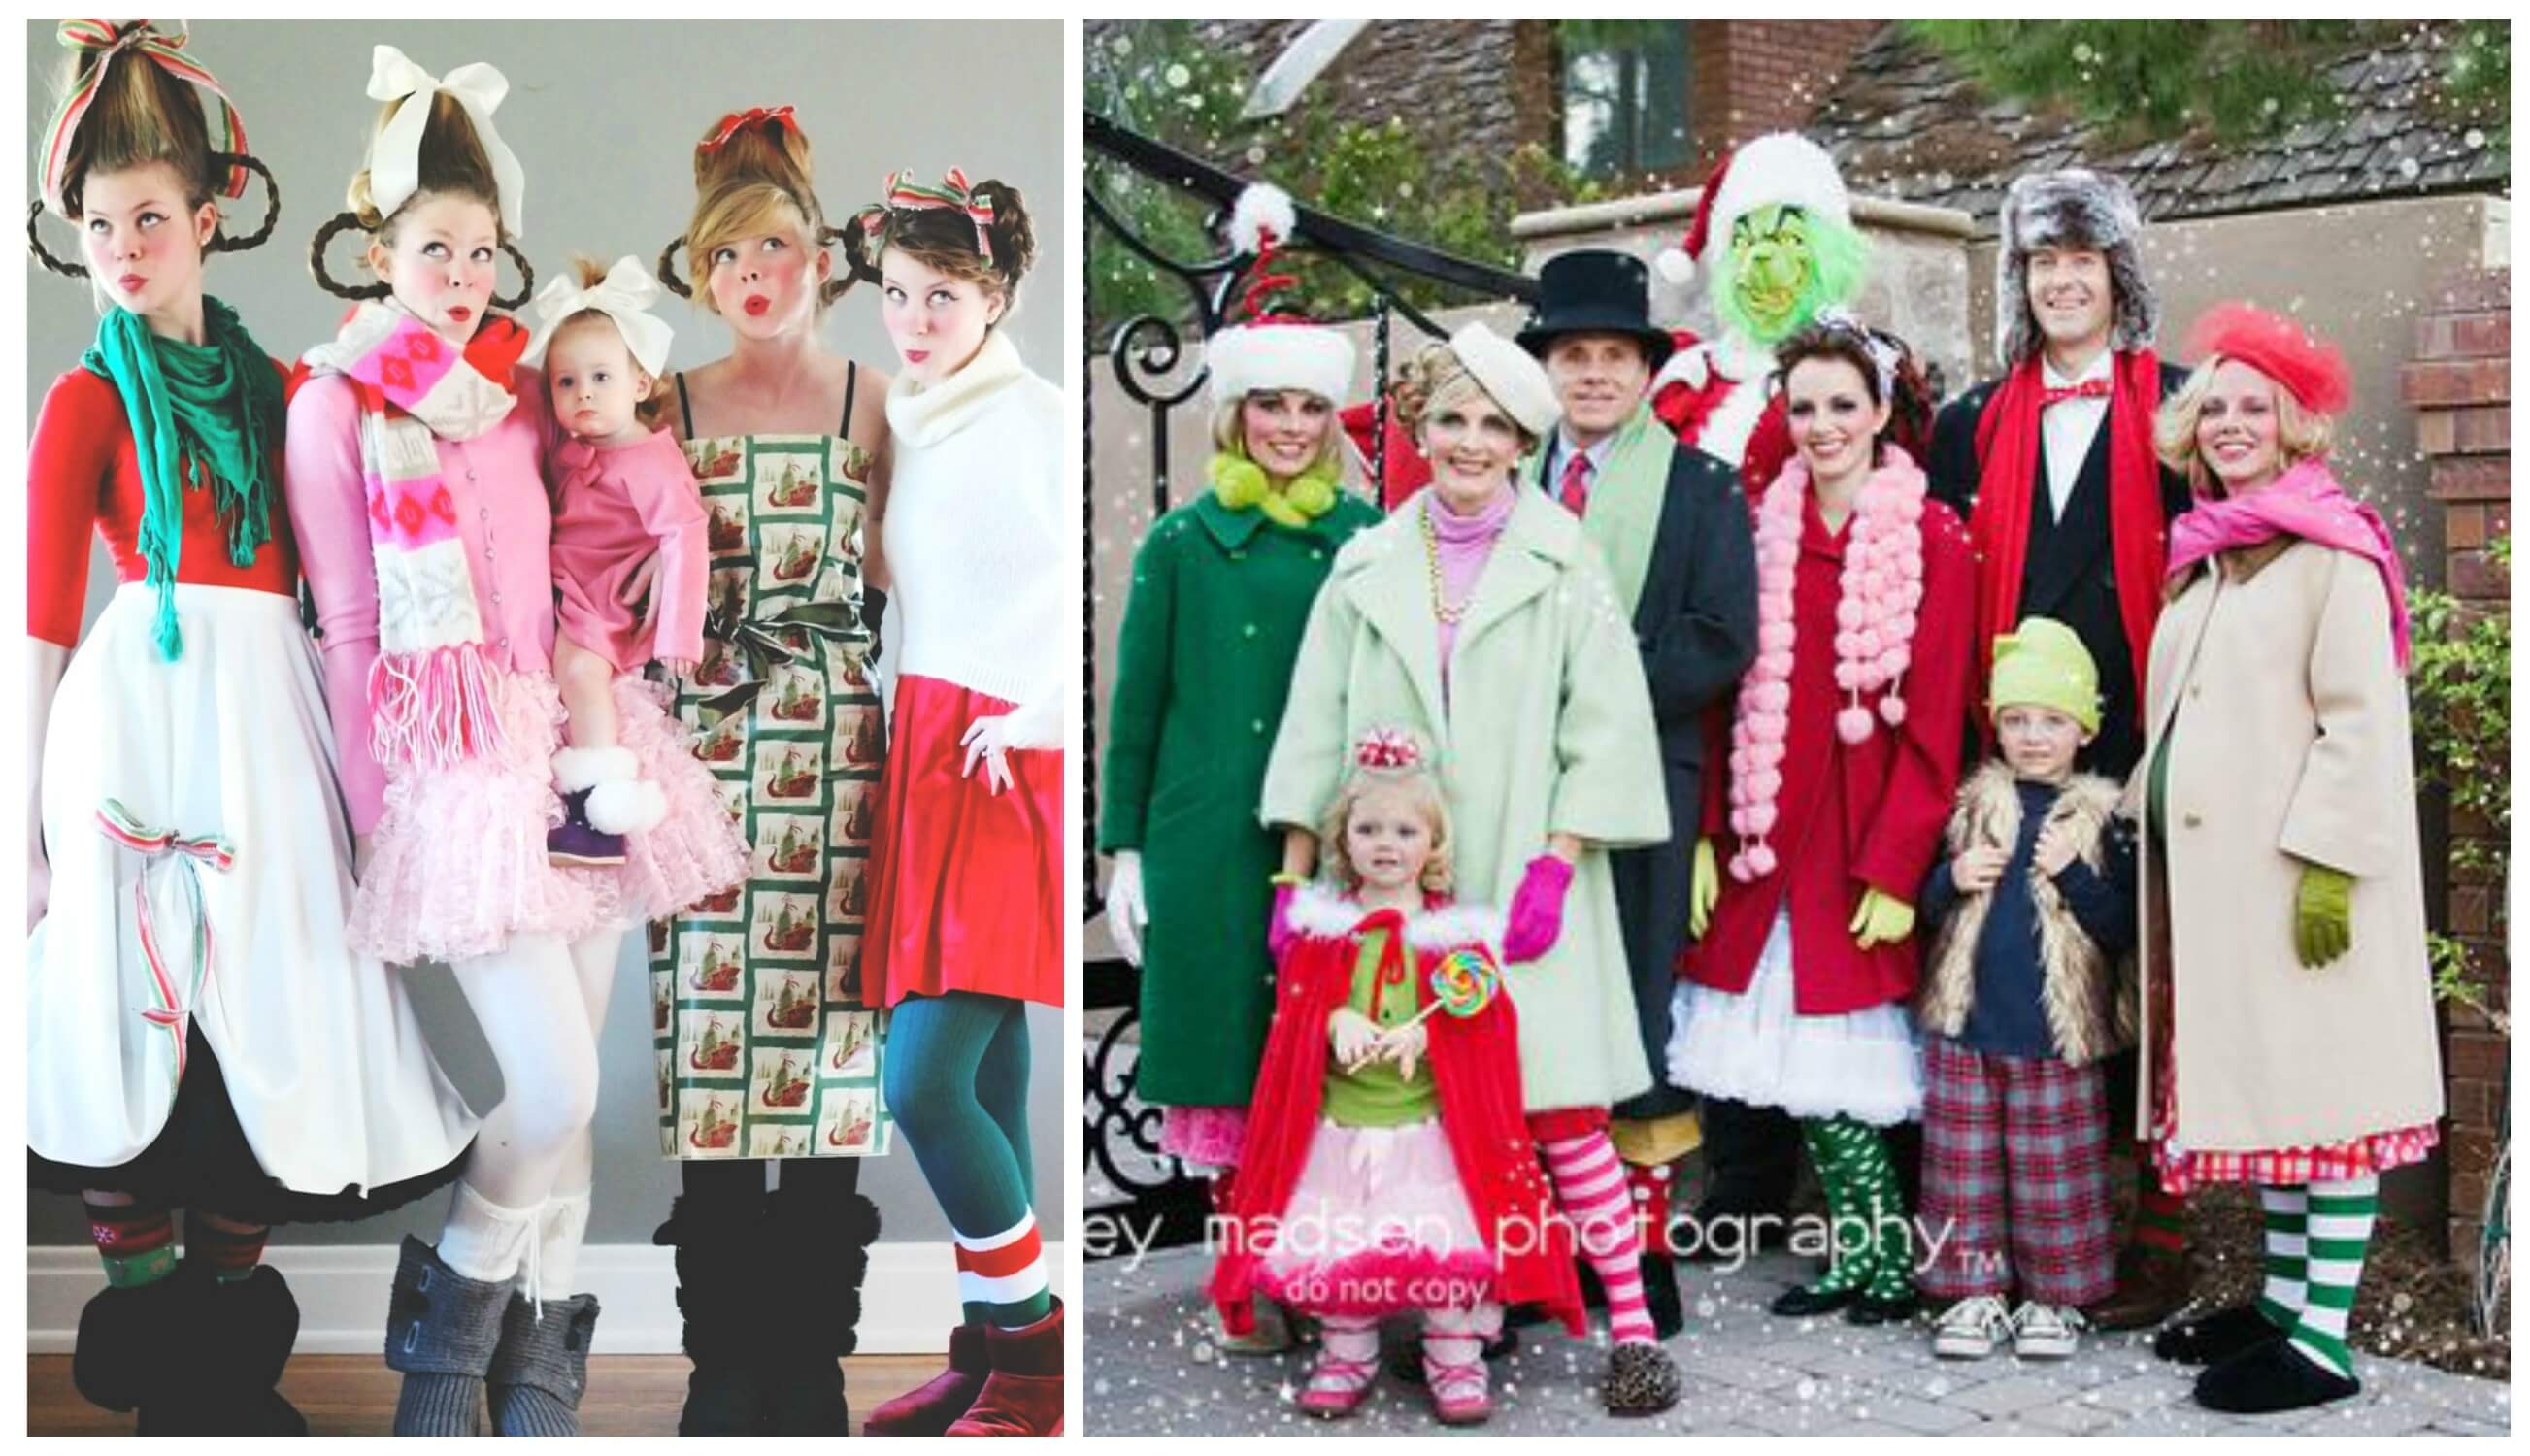 How to Throw a Grinch Costume Party - Halloween Costumes Blog